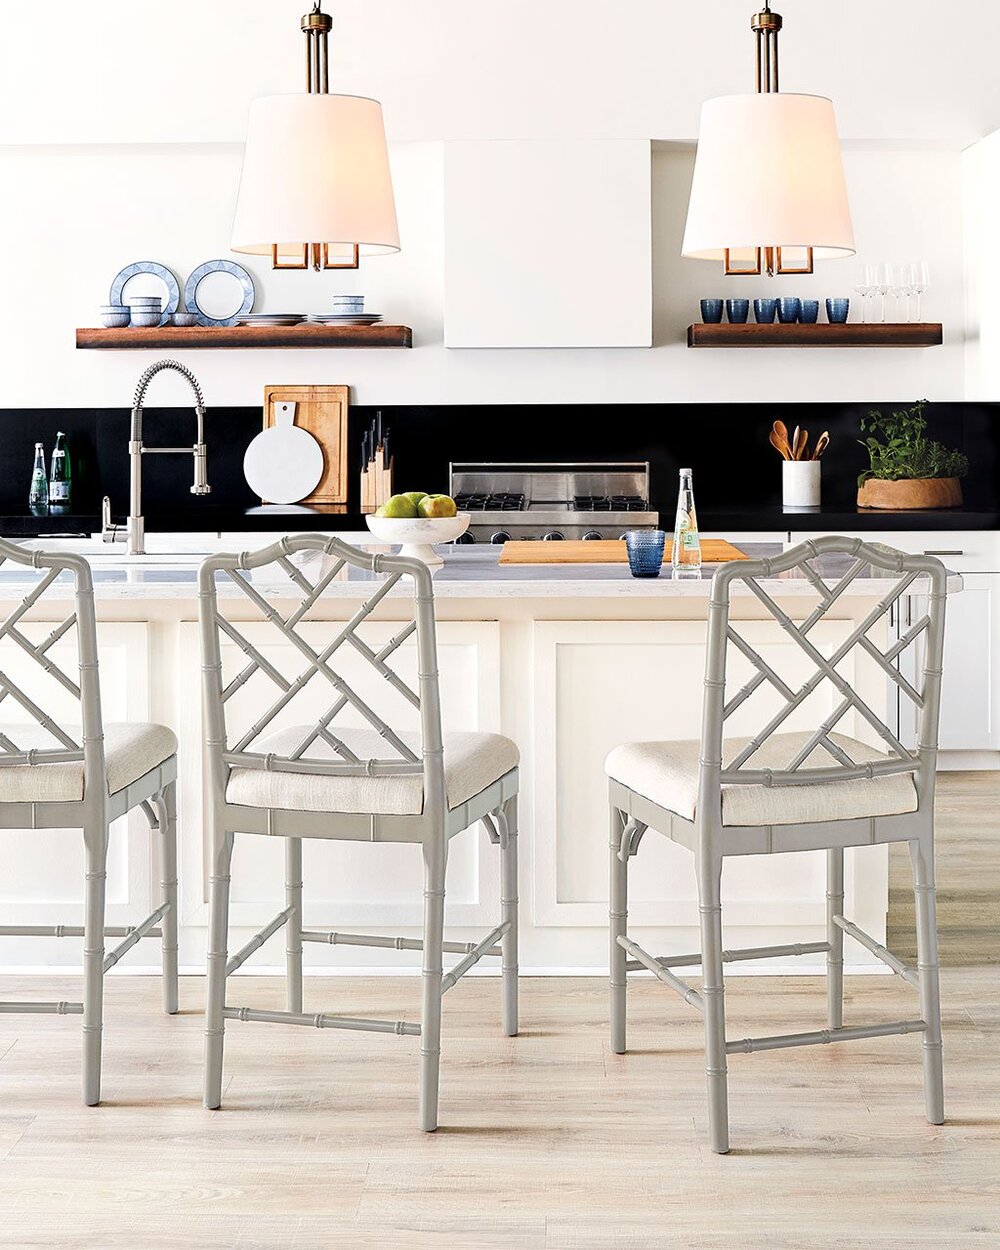 Barstools And Counter Height Stools, Bar Stool Ideas For Kitchen Island